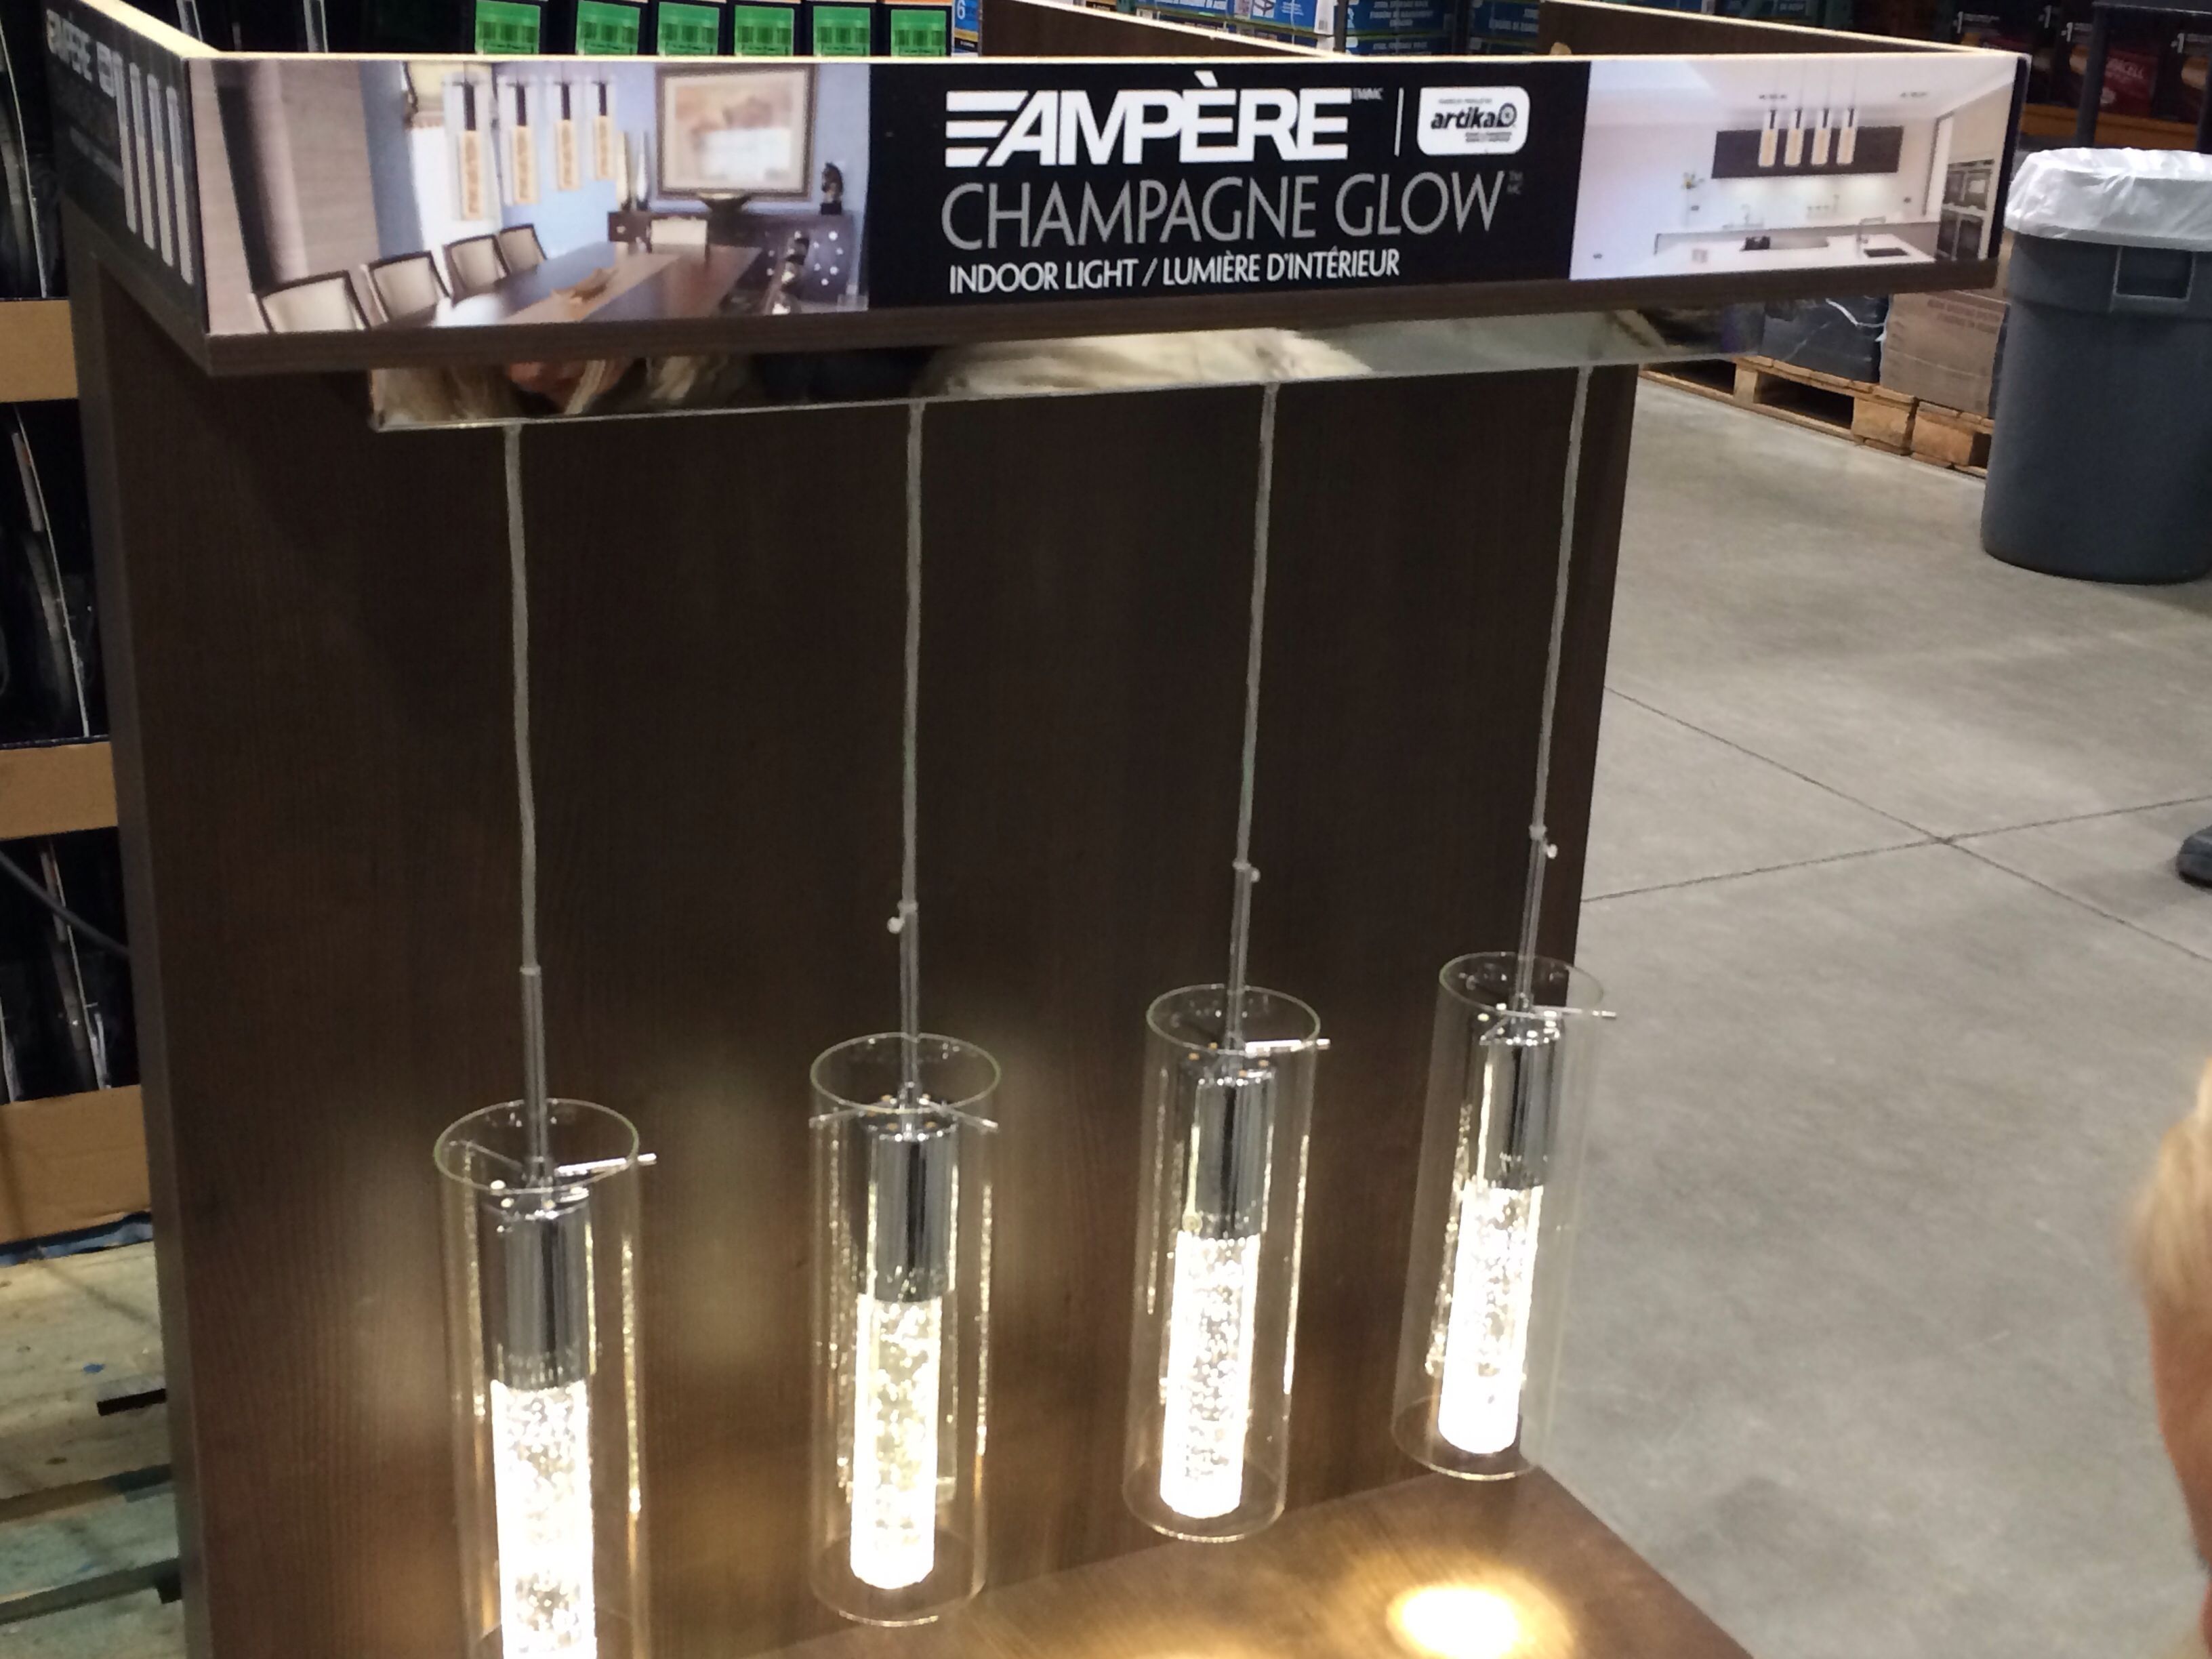 Costco: Ampère Champagne Glow Indoor Light (View 13 of 15)